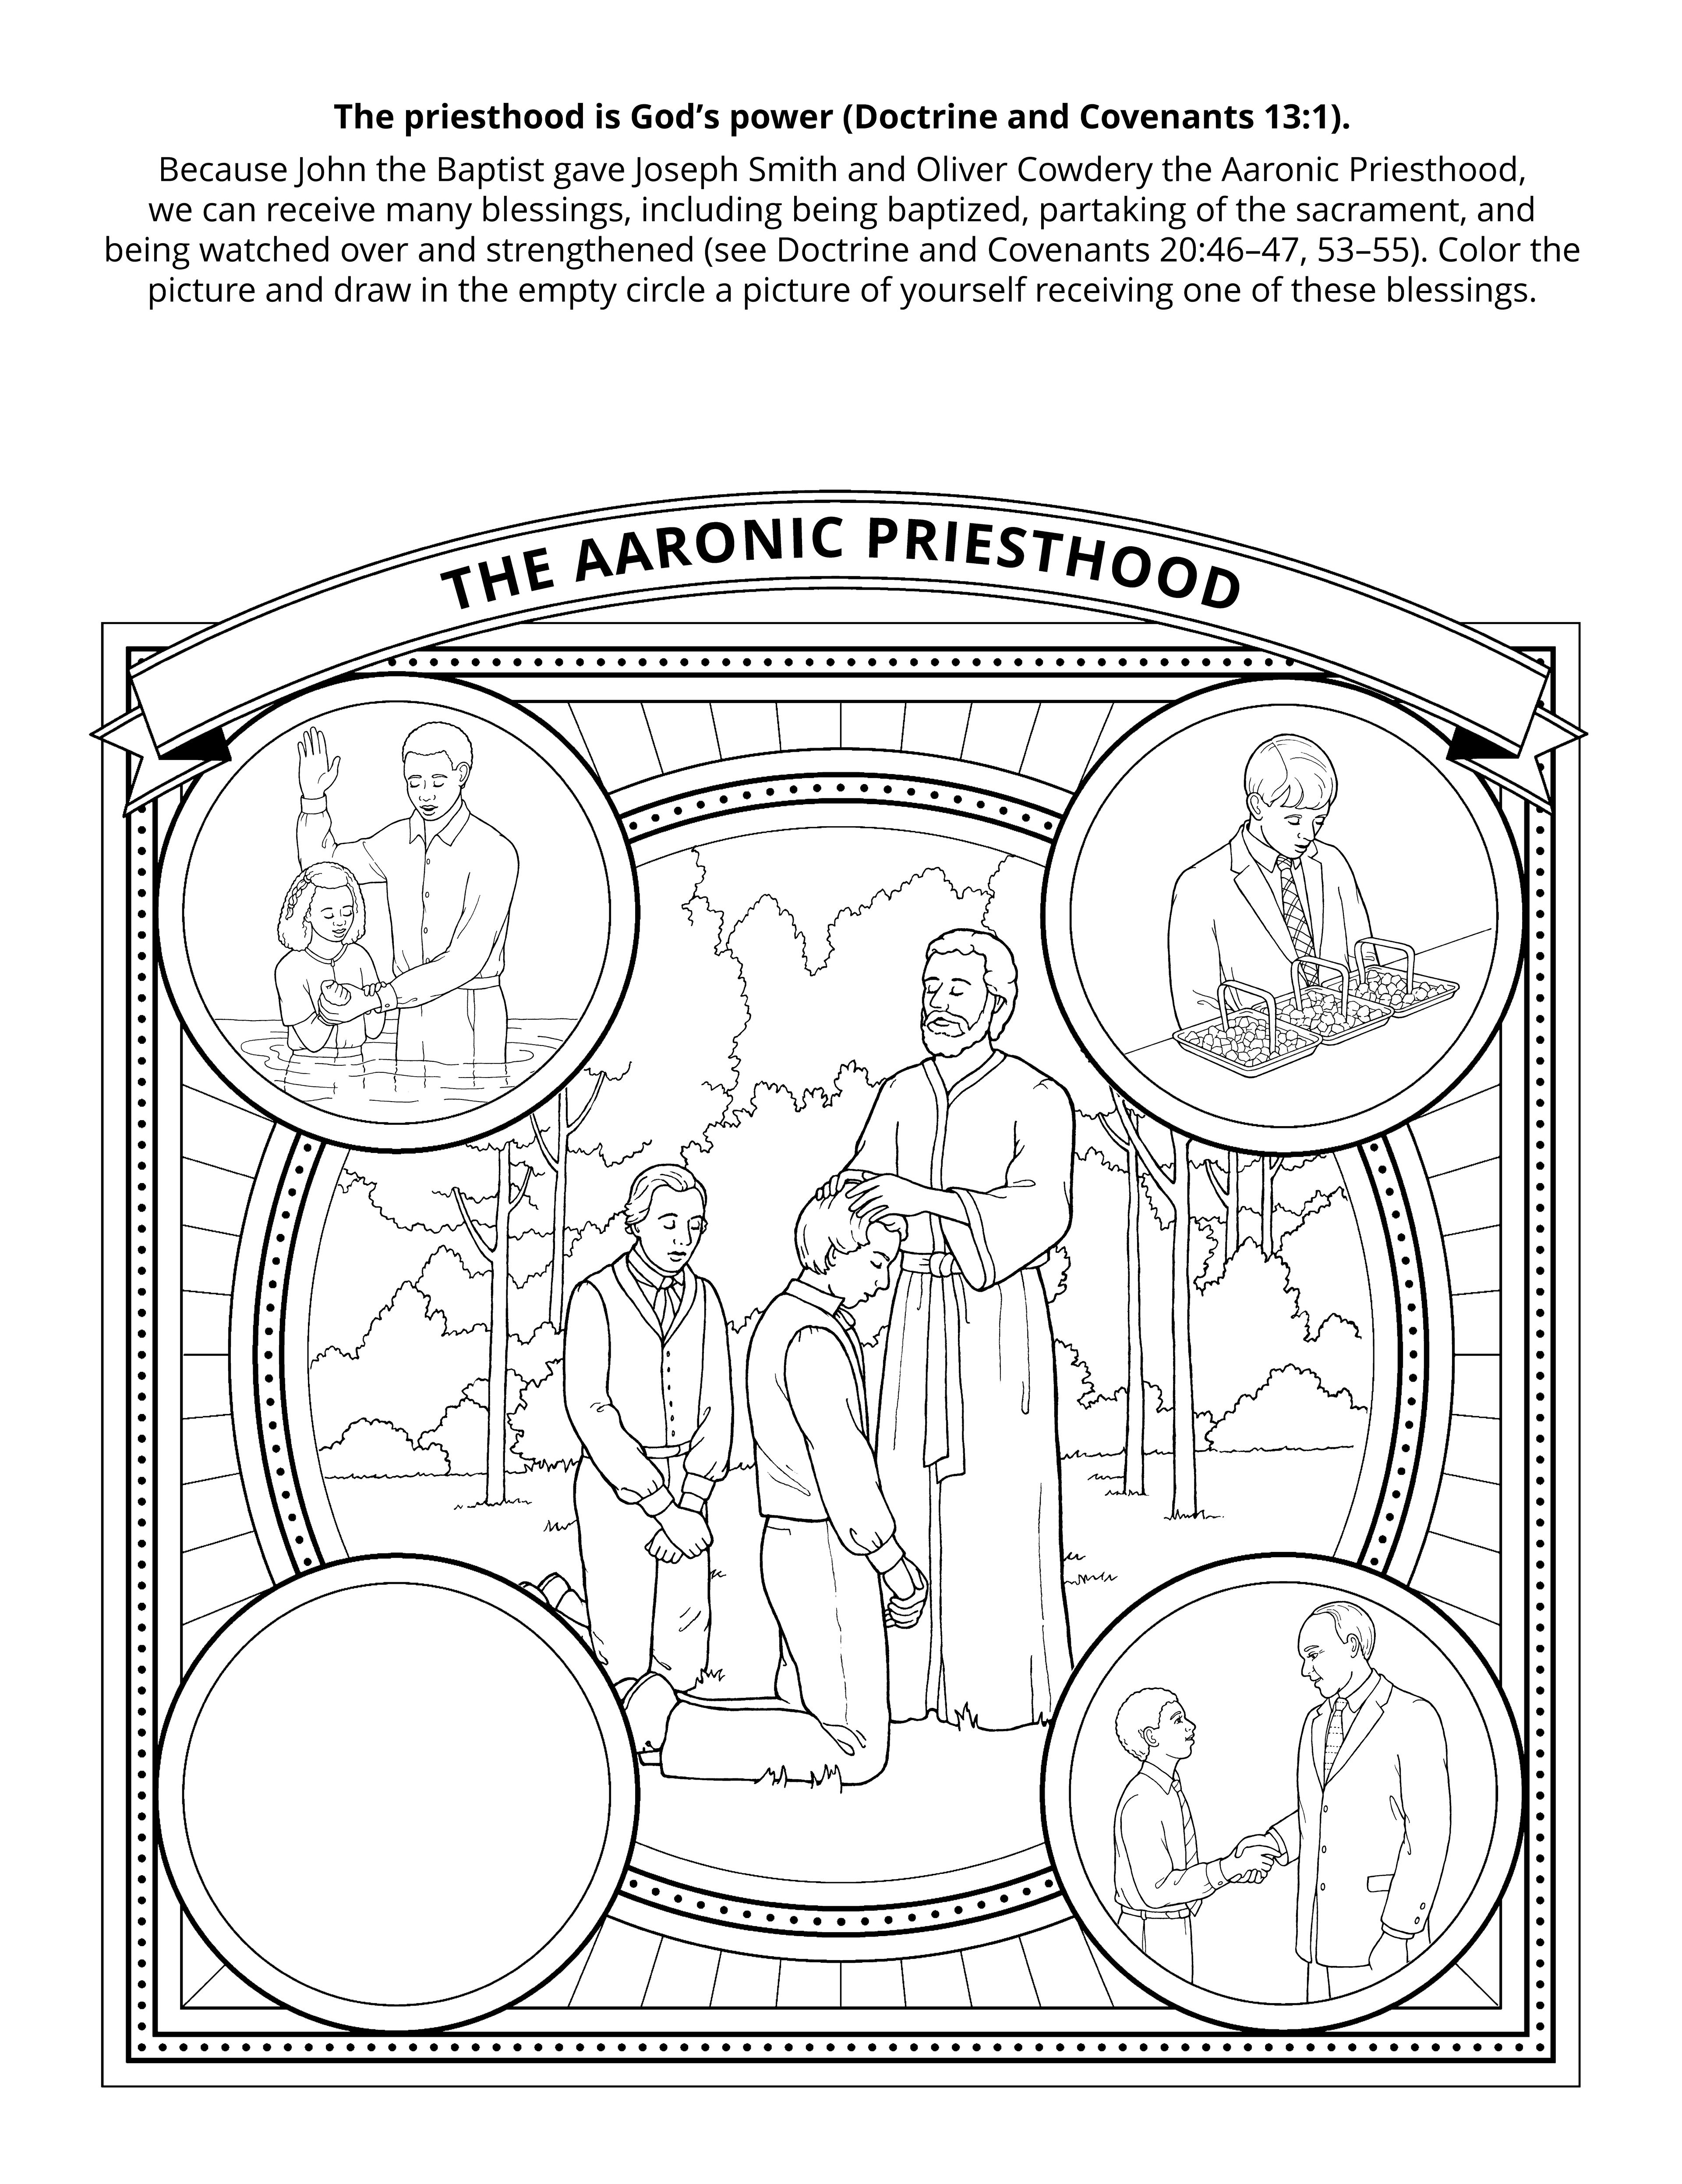 Illustration depicts aspects of Aaronic Priesthood